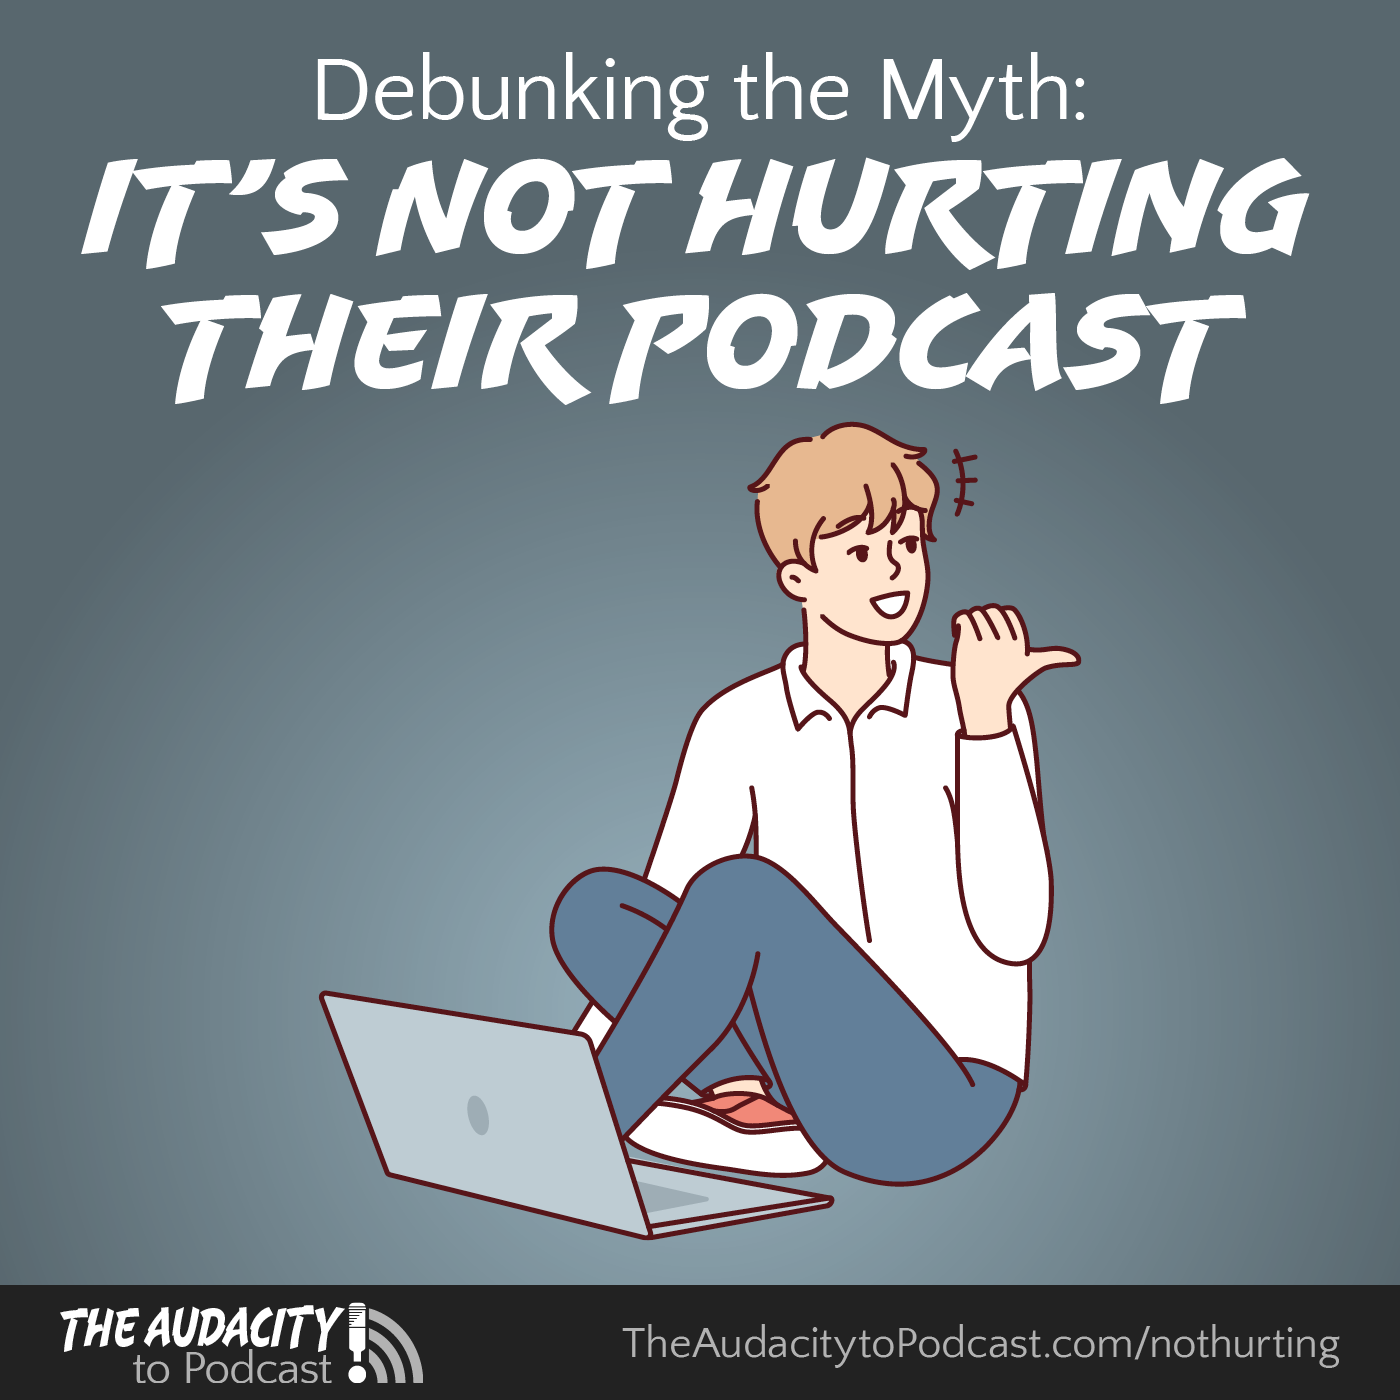 Debunking the Myth: “It’s Not Hurting Their Podcast”